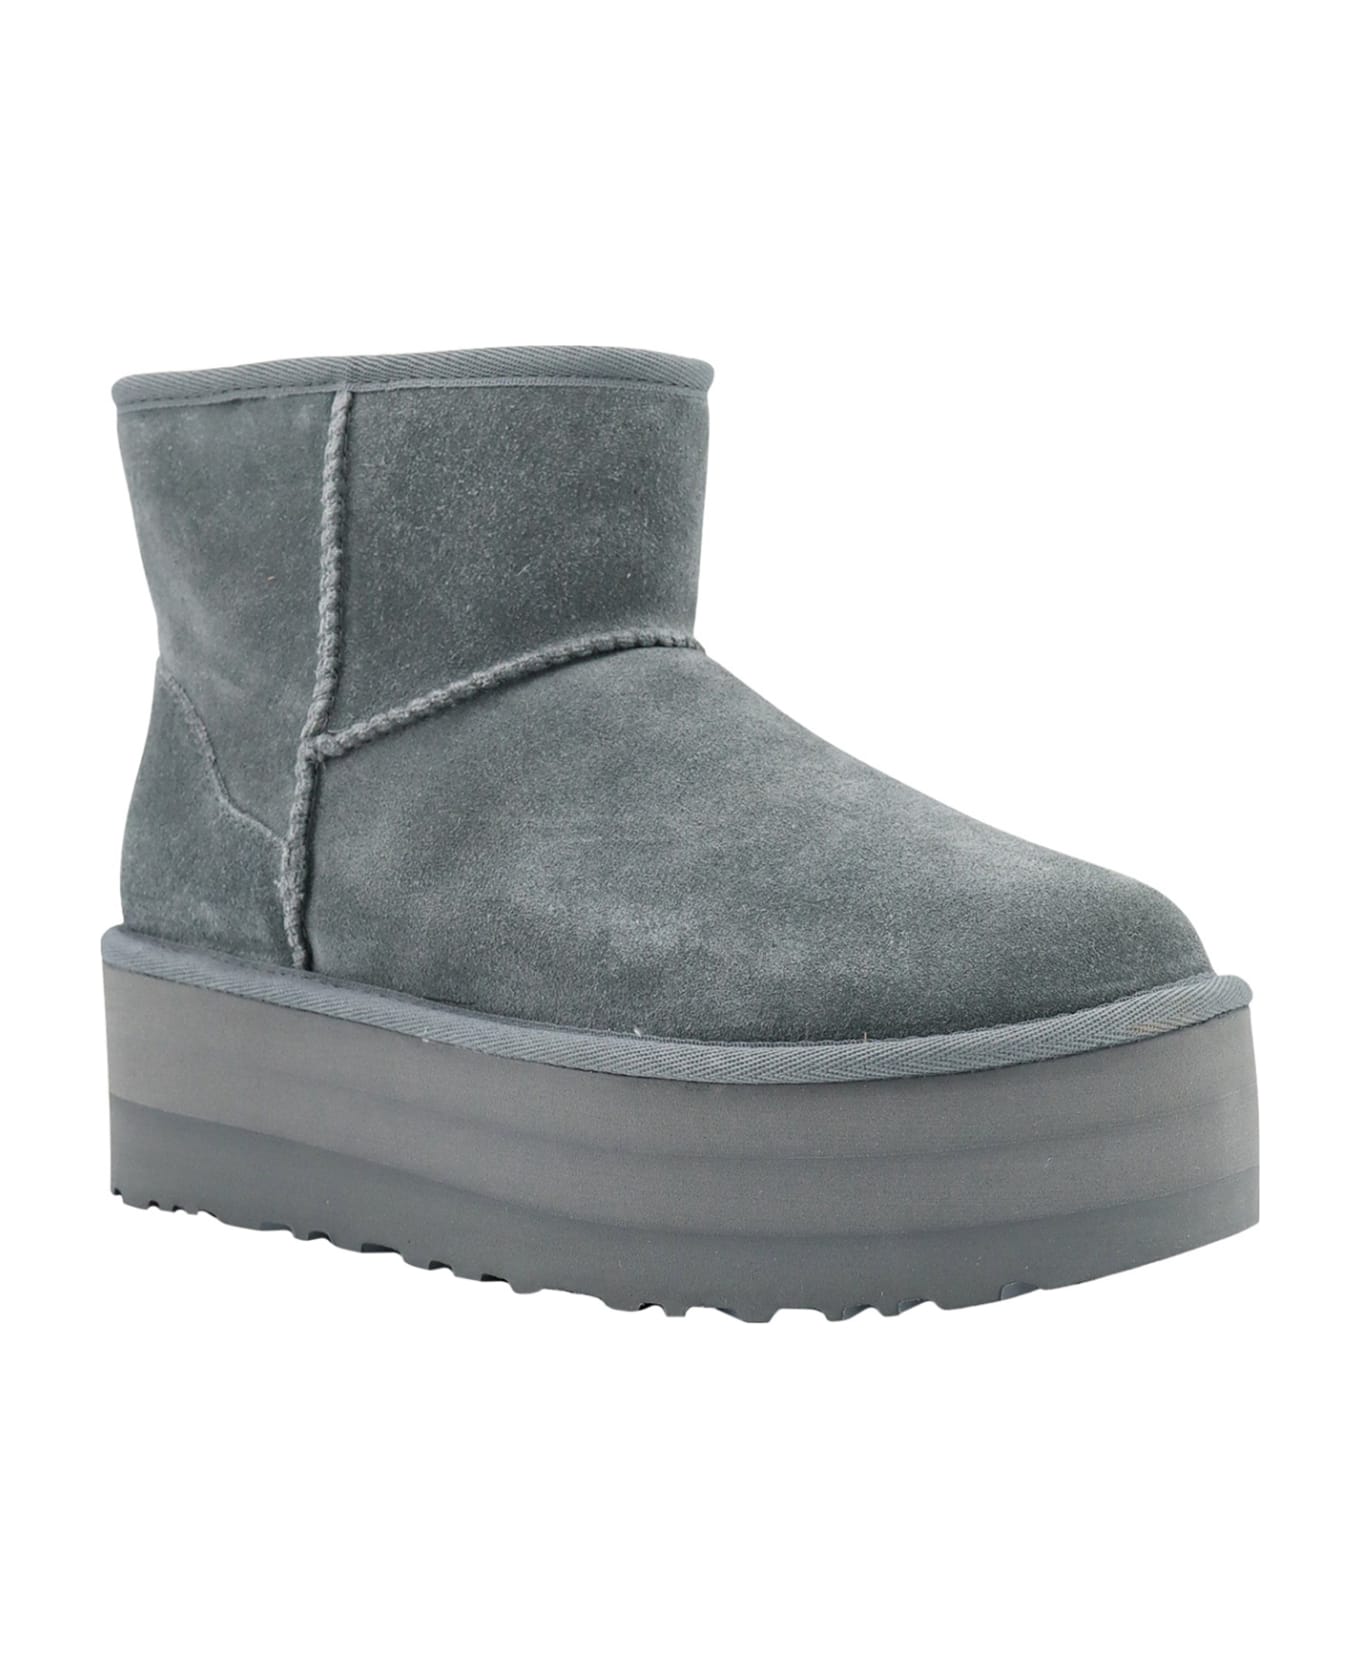 UGG Ankle Boots - Grey ウェッジシューズ